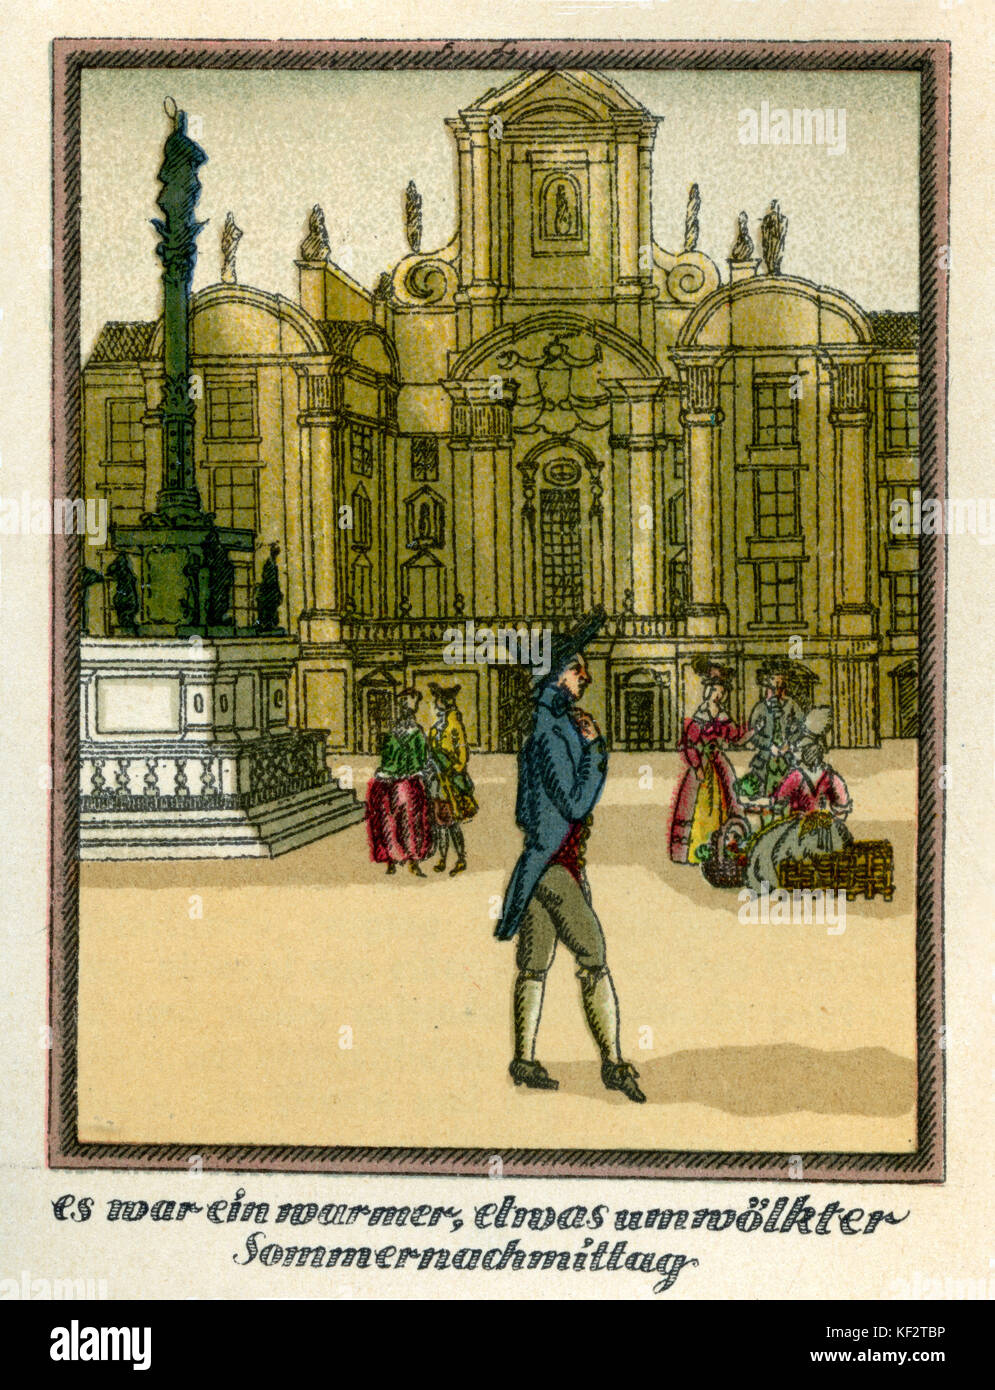 Mozart 's Journey to Prague, 1856. Fictional account of Mozart's journey with his wife Constanze in Autumn 1787 to Prague, where his opera Don Giovanni was to premiere. Caption reads:'…es war ein warmer, etwas umwölkter Sommernachmittag' ['It was a warm, somewhat overcast summer afternoon']. Mozart and Constanze and the Schinzberg estate.  EM:  German romantic poet and author, 8 September 1804 – 4 June 1875. WAM: Austrian composer, 27 January 1756 - 5 December 1791. Stock Photo